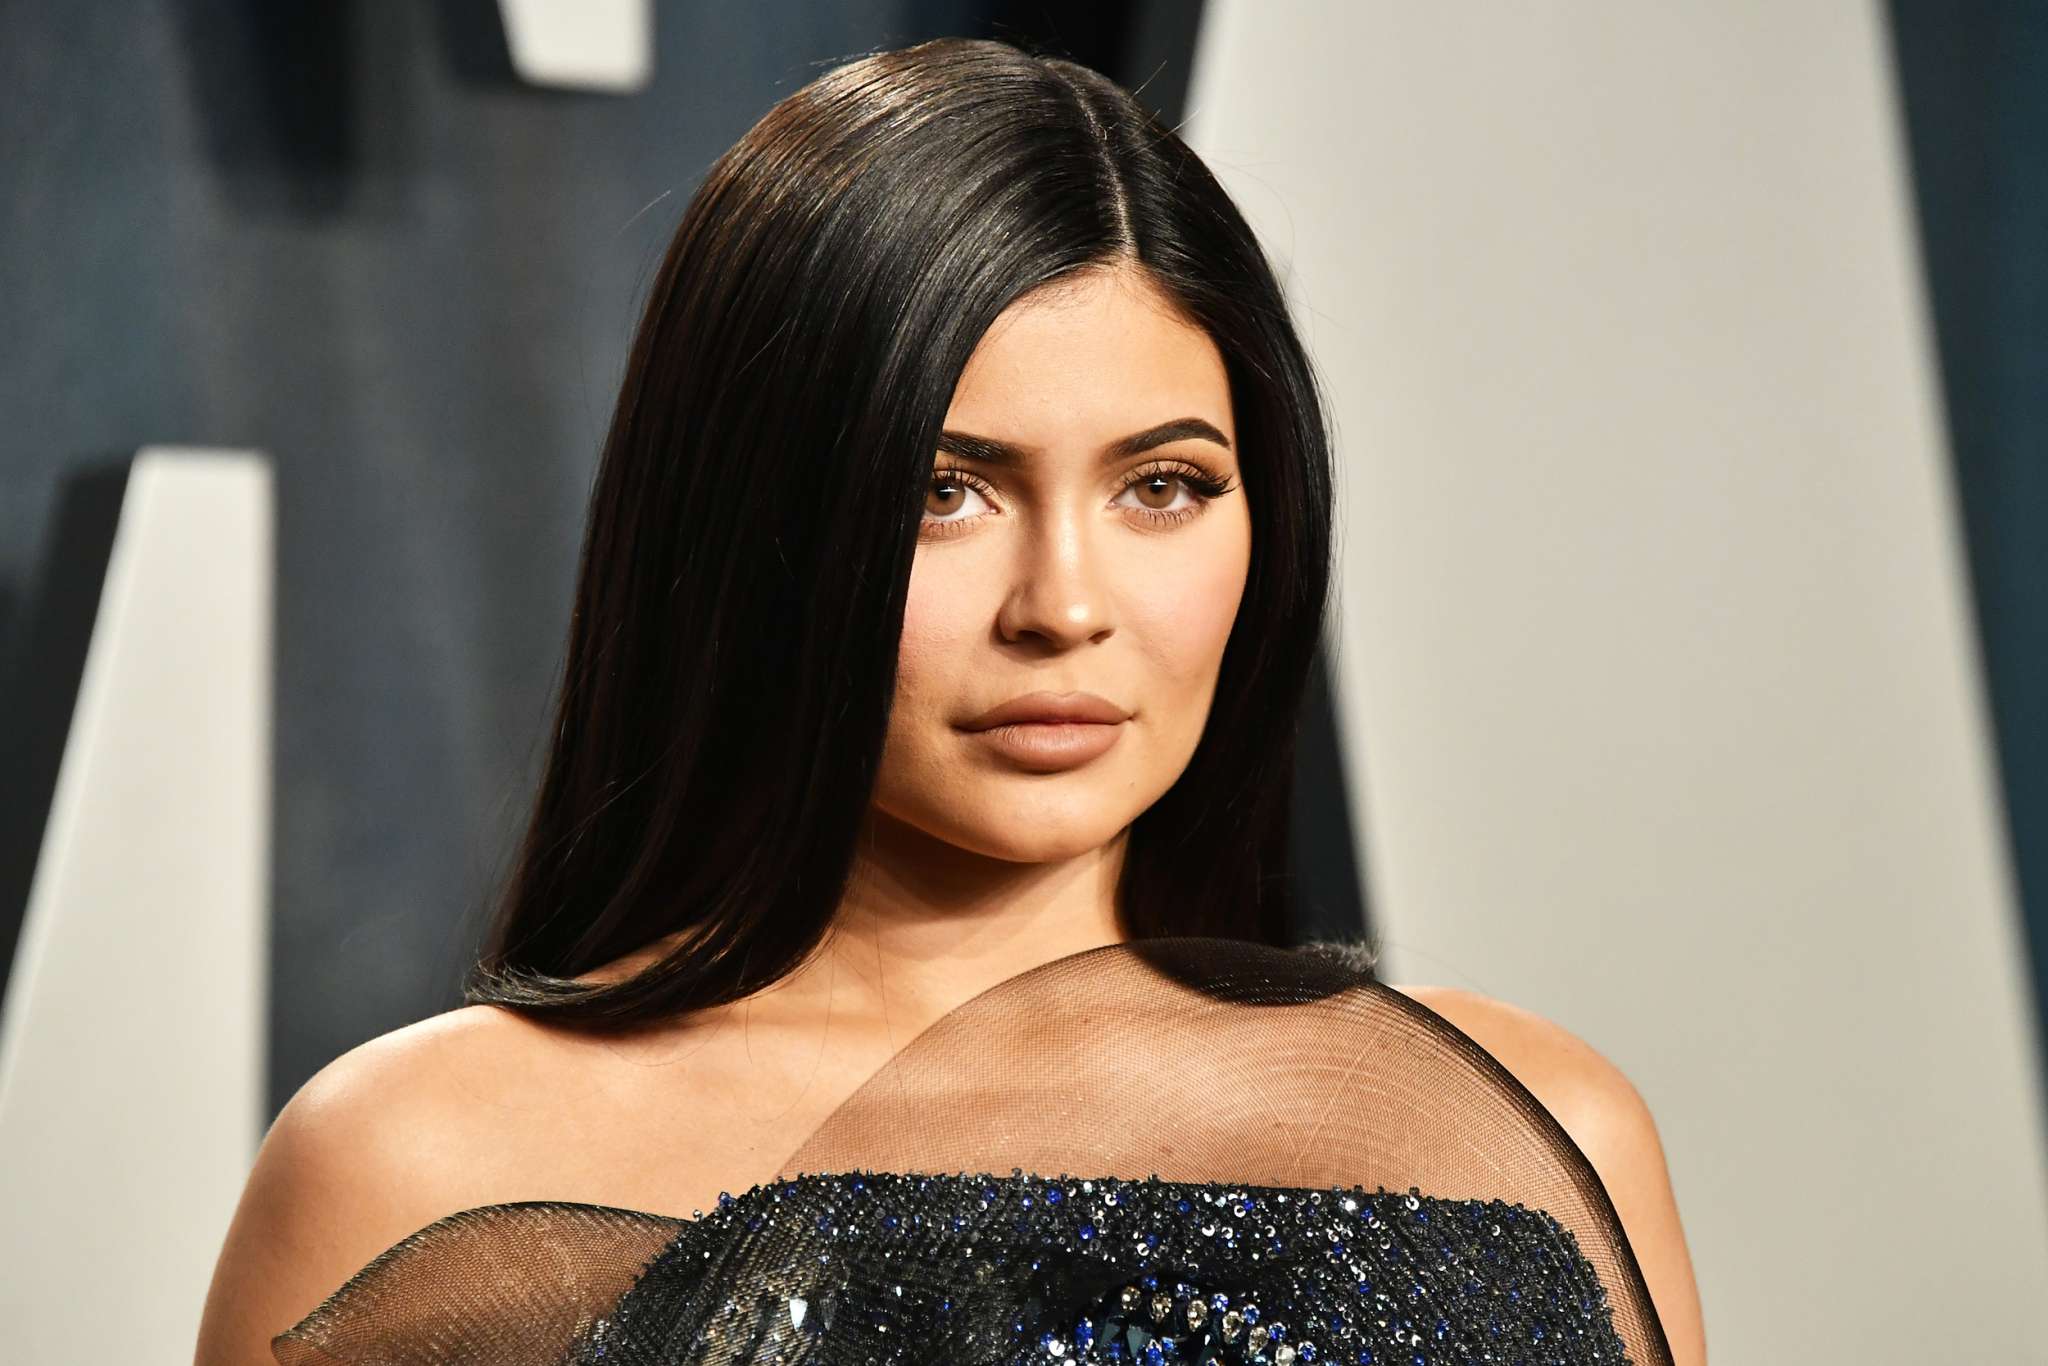 Kylie Jenner's Recent Travel Of Driving 30 Minutes Out Of Her Way To Fly 17 Minutes On A Private Jet Has Been Met With Tons Of Criticism